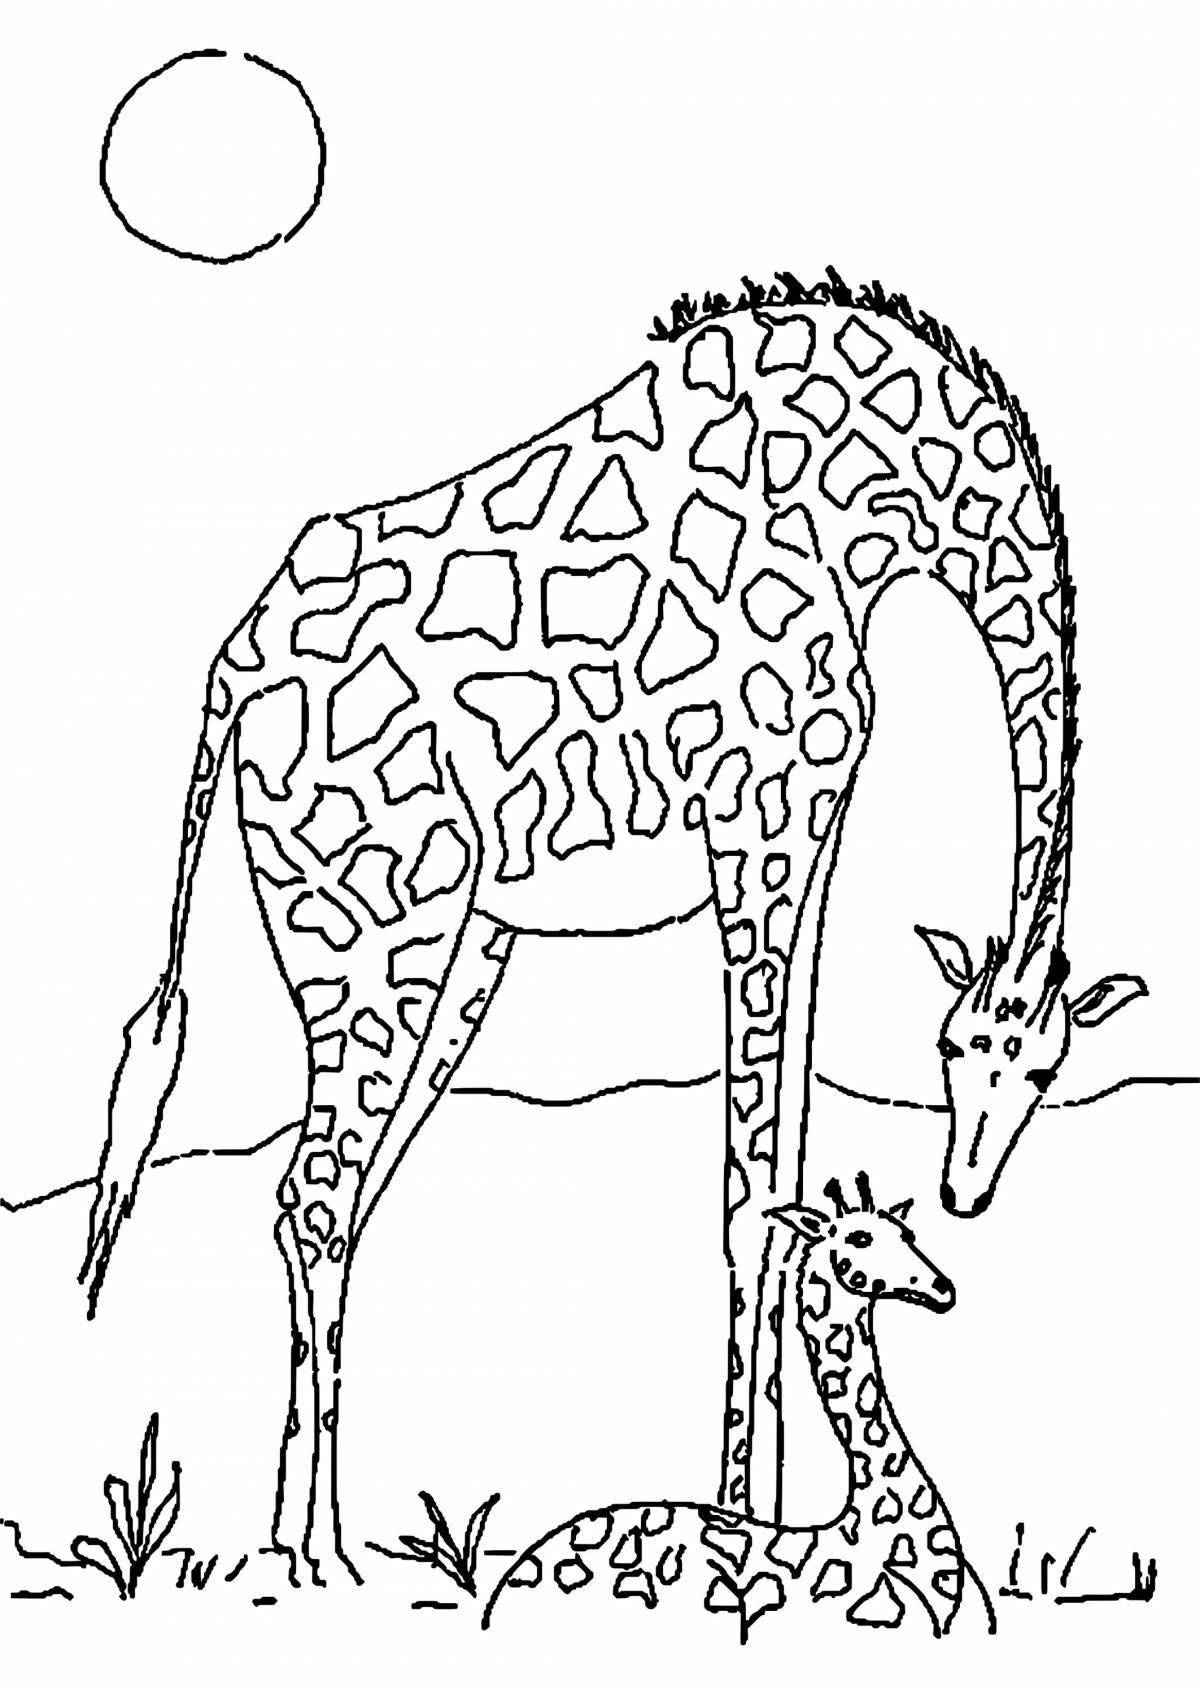 Cute 10 year old animal coloring pages